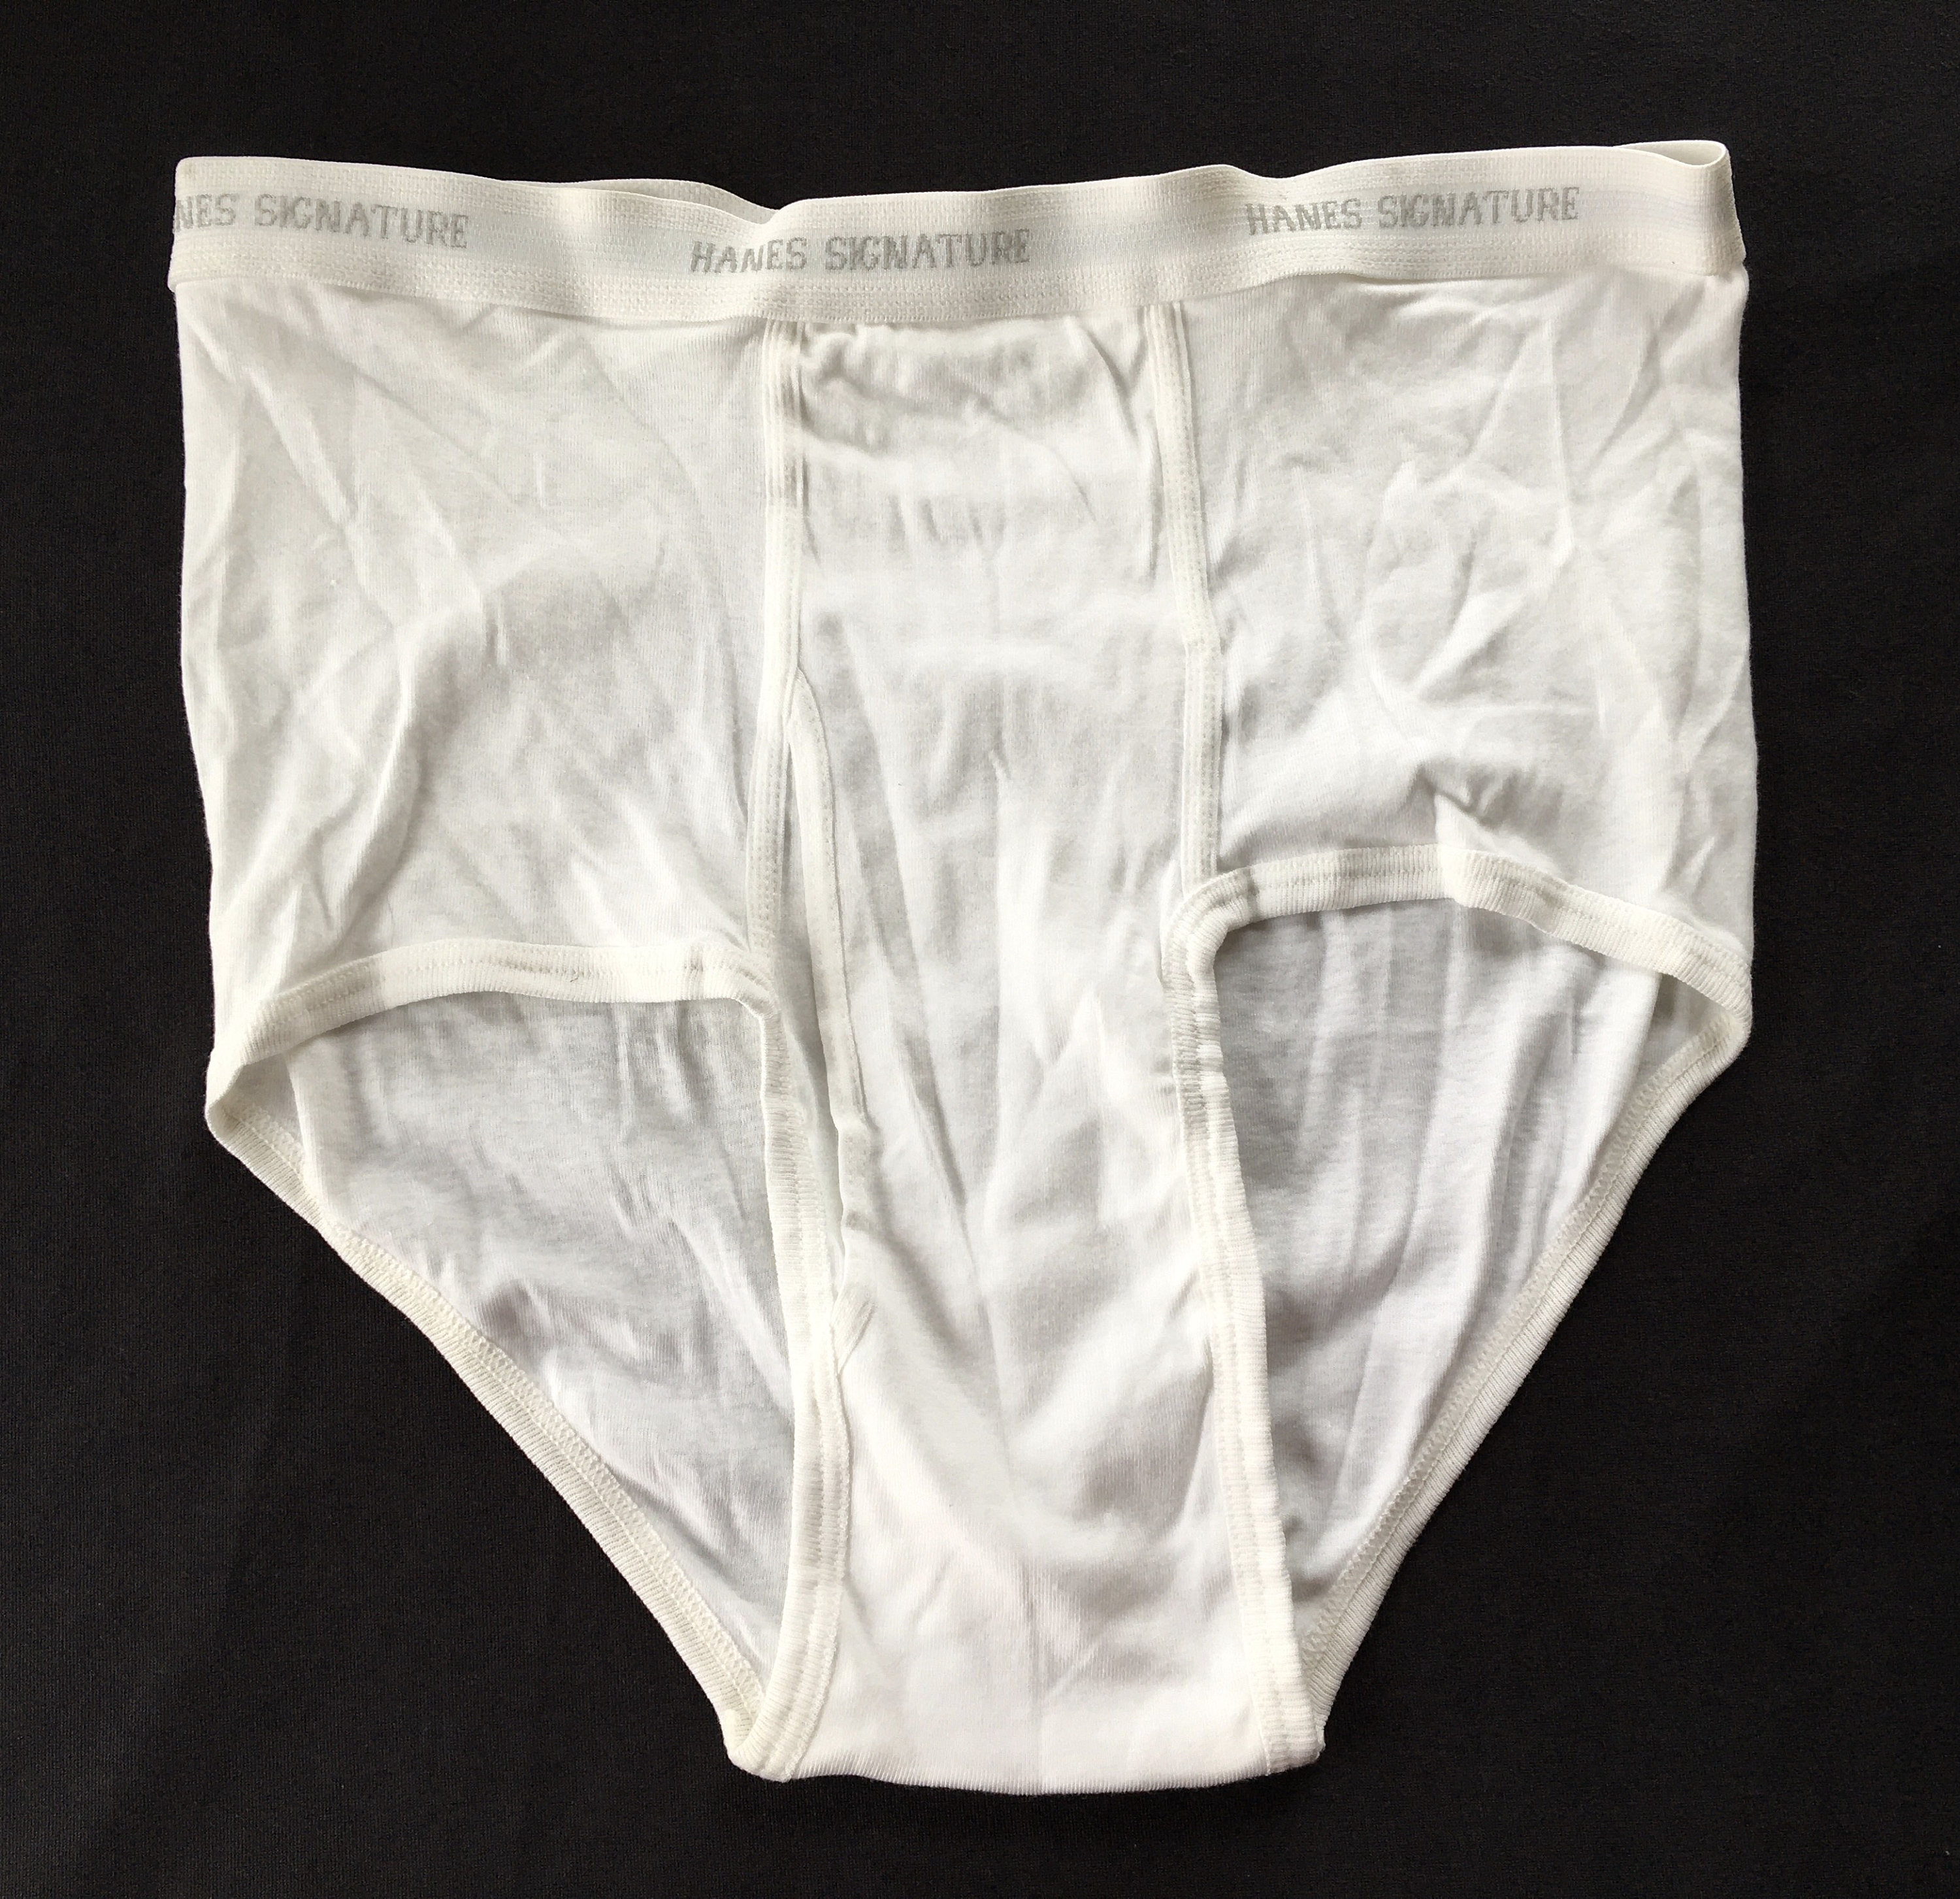 Vintage Hanes Signature Collection Briefs Cotton Underwear Tighty Whities  Mens Size 42 